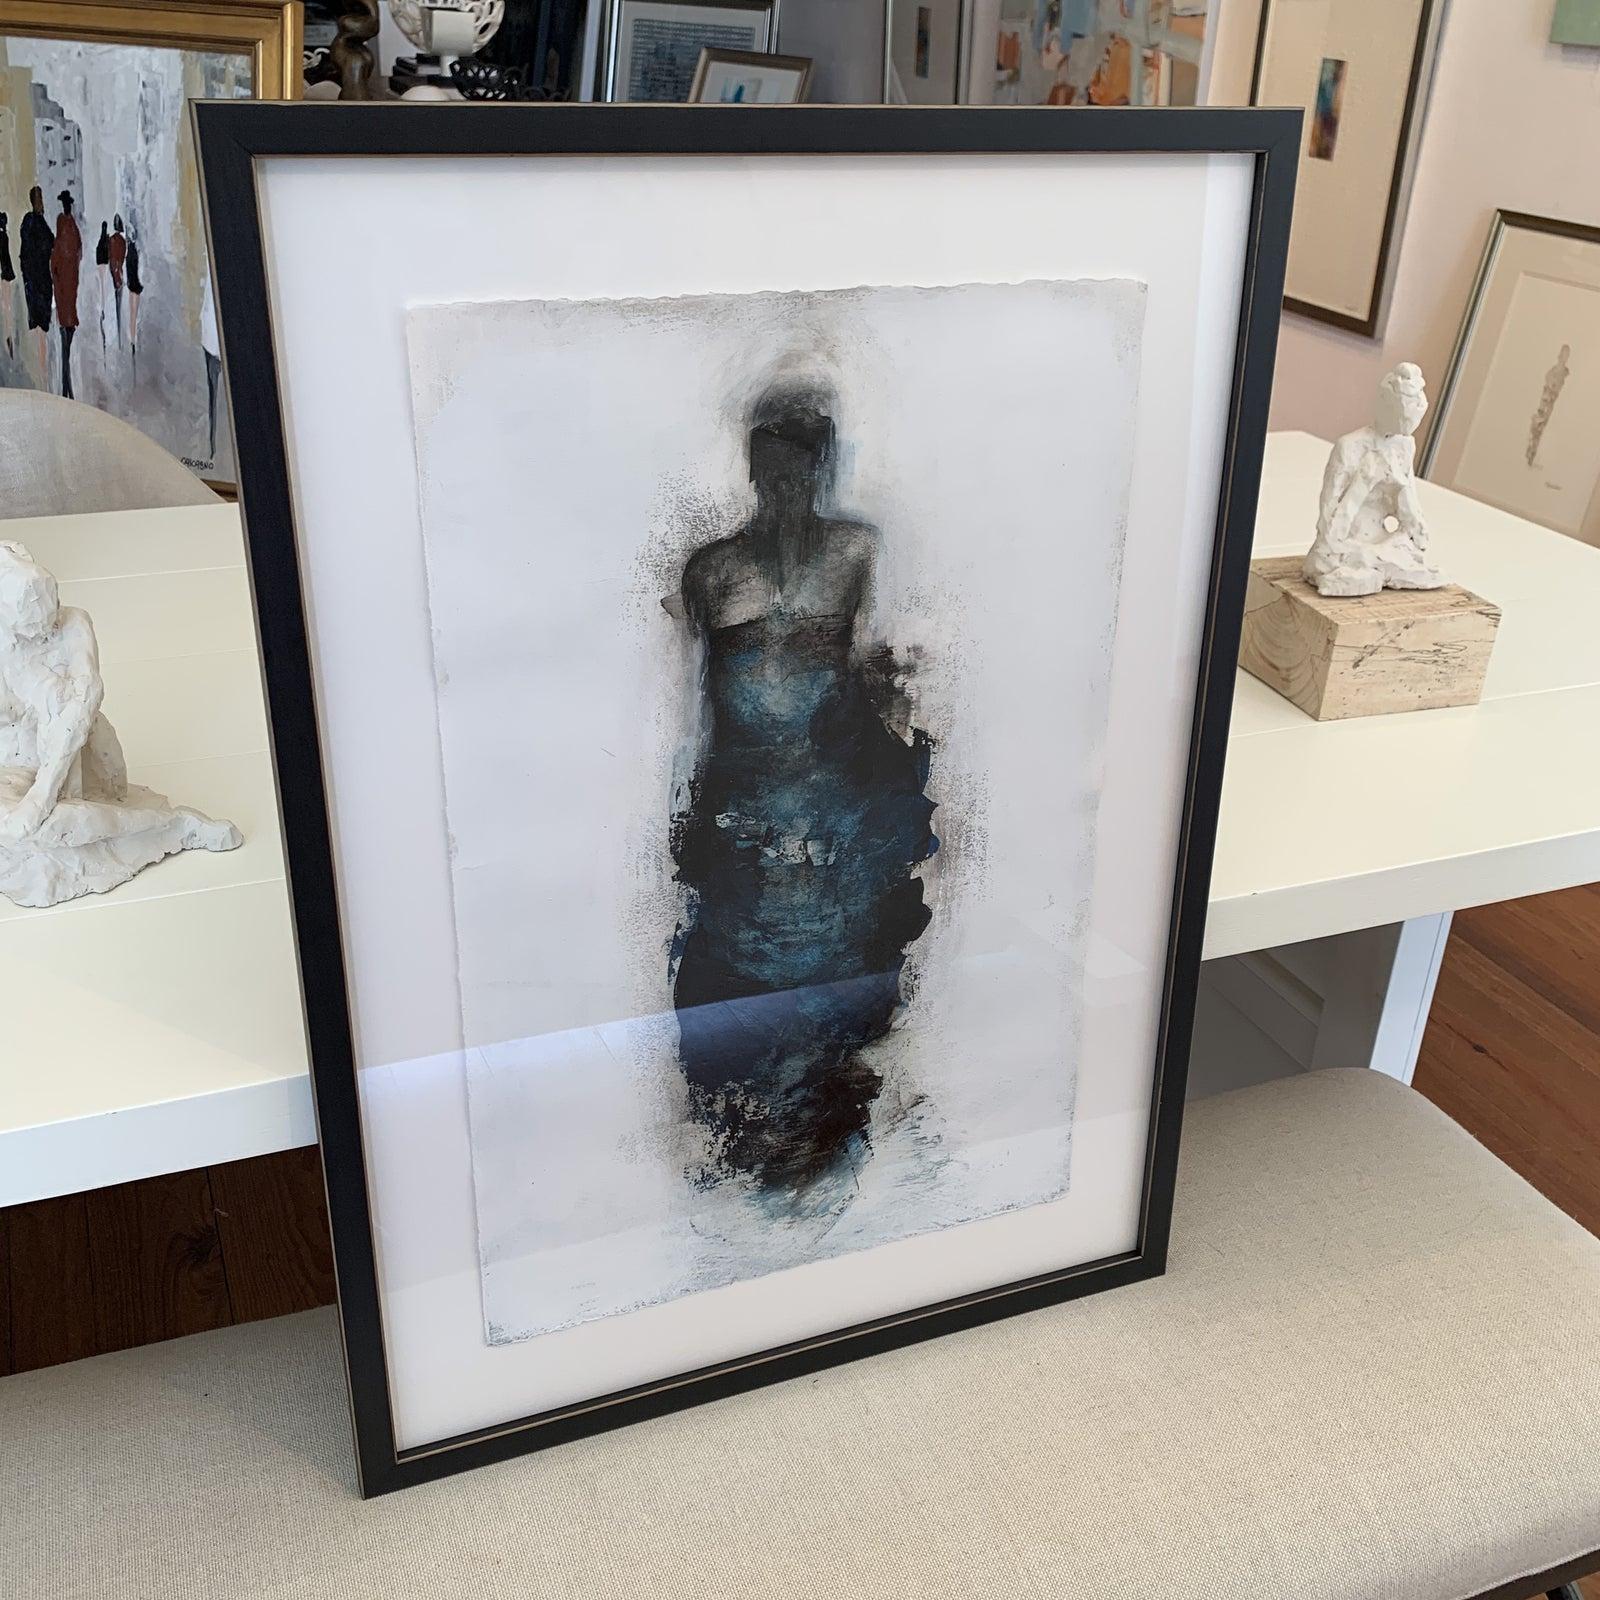 Framed Figurative Piece by Atlanta Based Artist, Tracy Sharp. Signed on the reverse. Beauty touches of blue, black and silvers. The frame is a thin black wooden frame with slight gold trim detail. More pictures are available.

Biography. Tracy